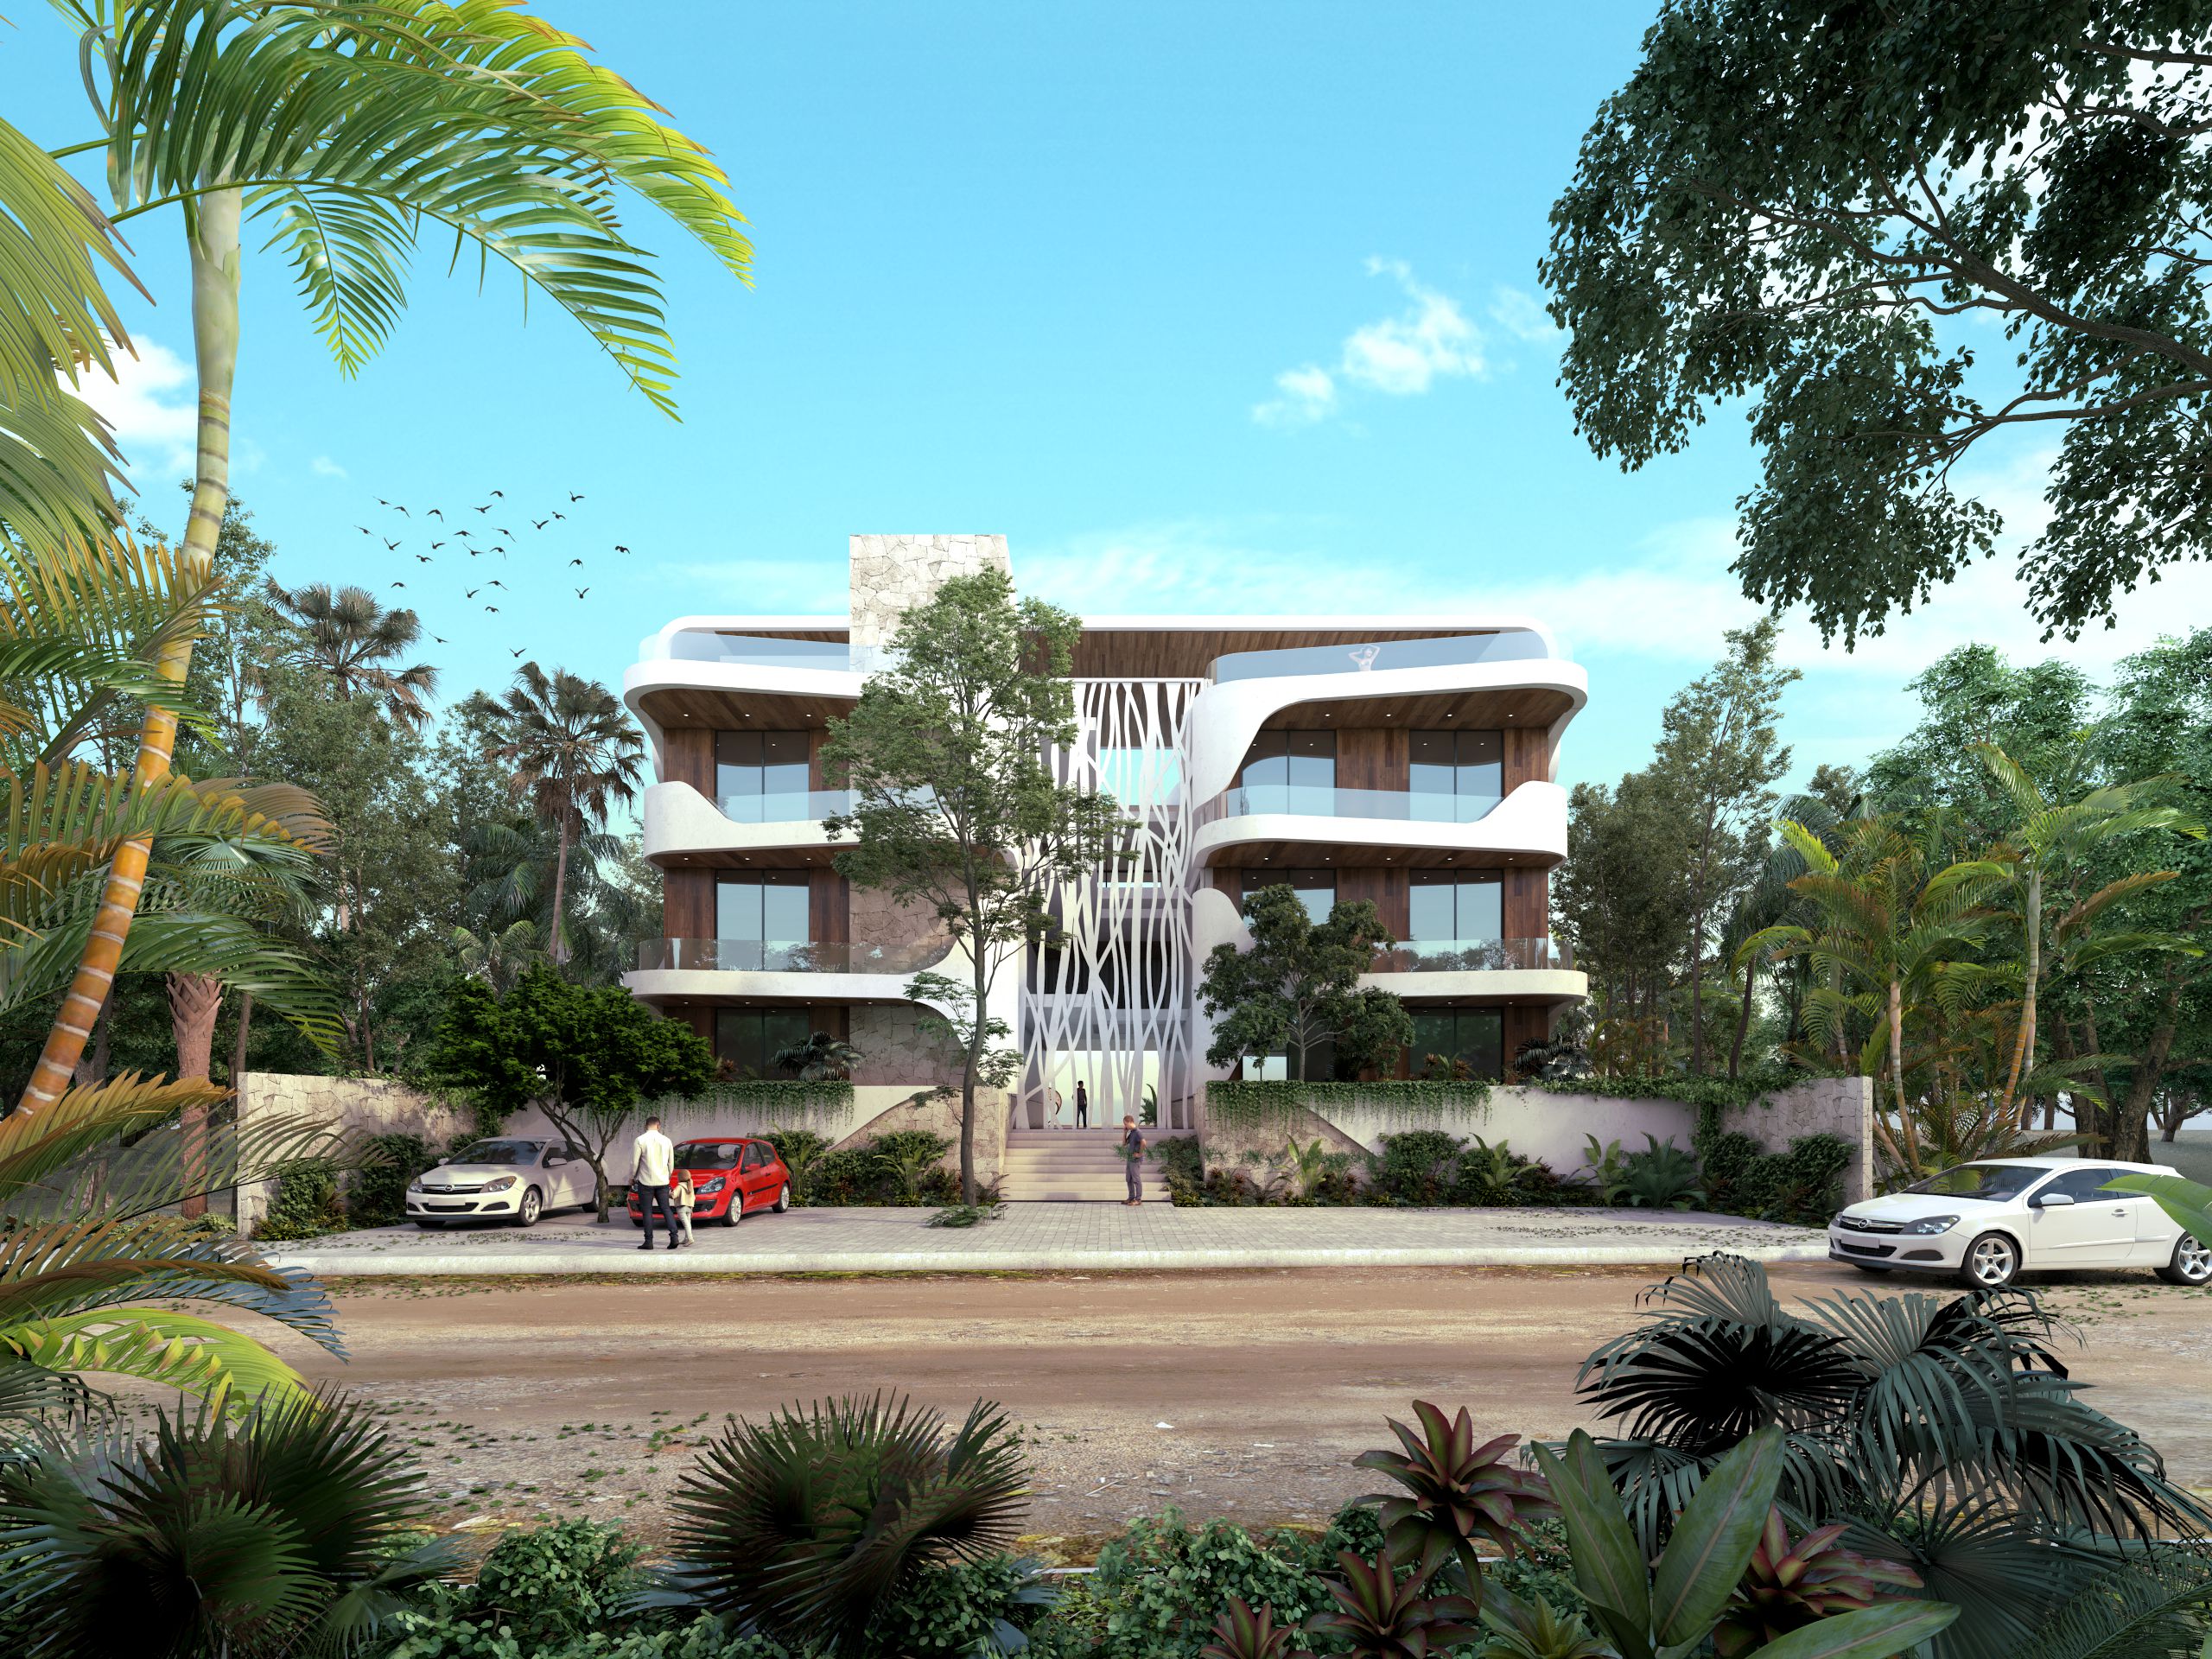 e oceanfront real estate in tulum tankah 52 facade from street